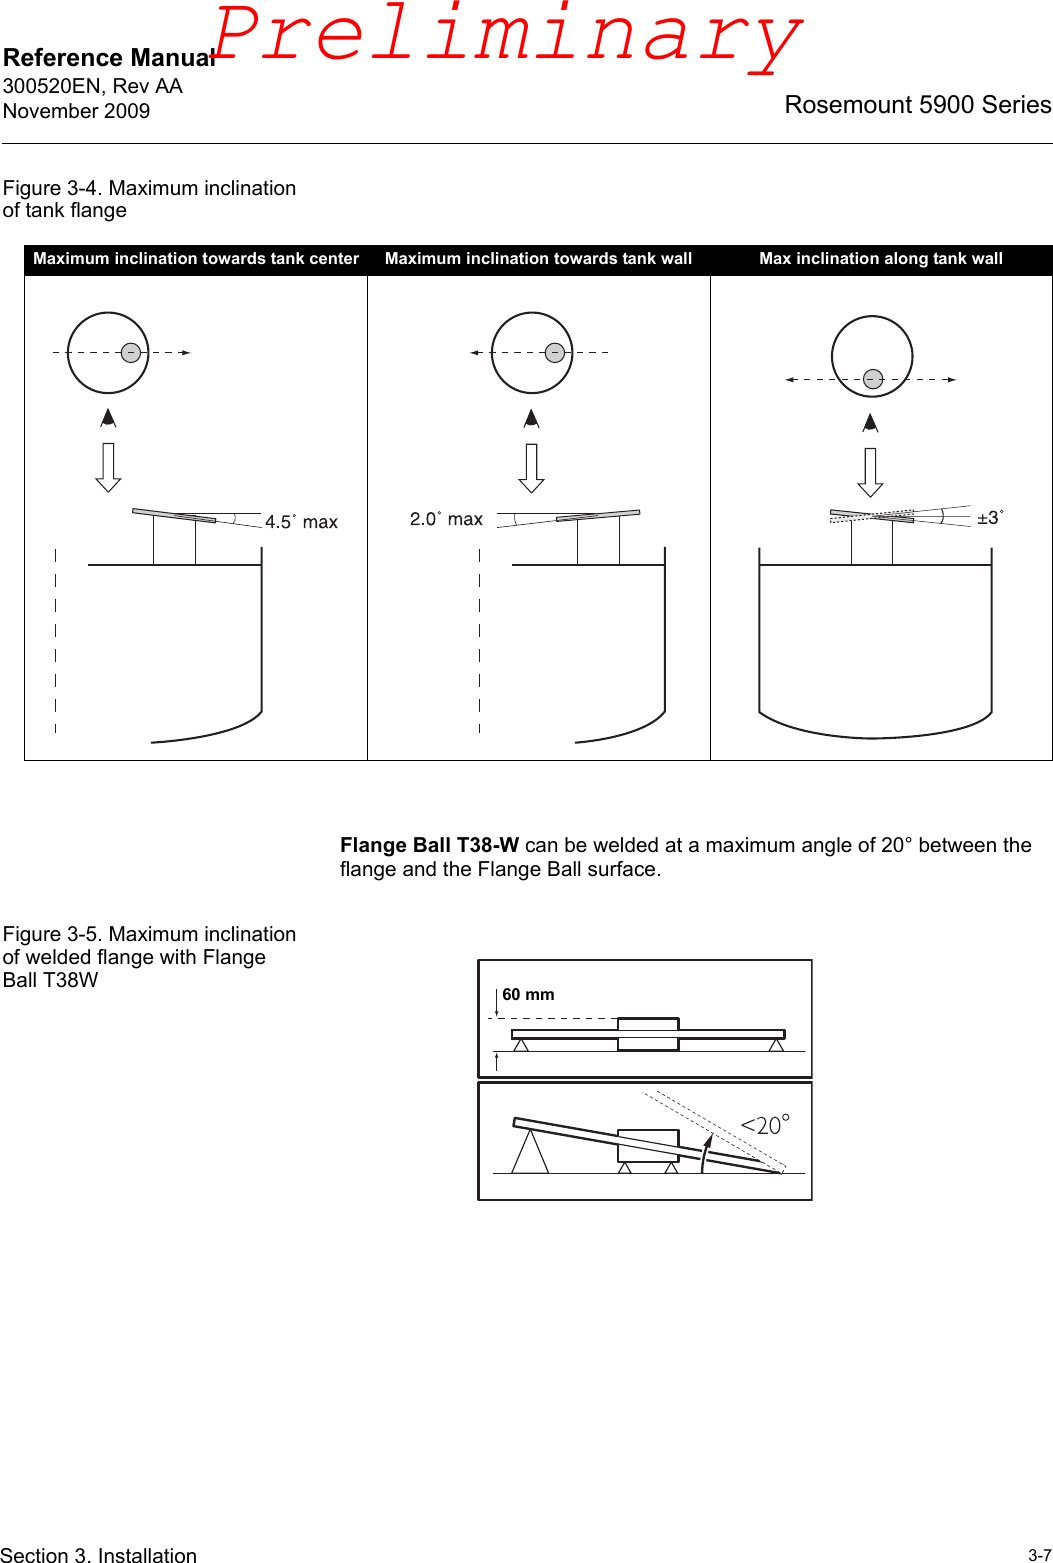 Reference Manual 300520EN, Rev AANovember 20093-7Rosemount 5900 SeriesSection 3. InstallationFigure 3-4. Maximum inclination of tank flangeFlange Ball T38-W can be welded at a maximum angle of 20° between the flange and the Flange Ball surface.Figure 3-5. Maximum inclination of welded flange with Flange Ball T38WMaximum inclination towards tank center Maximum inclination towards tank wall Max inclination along tank wall60 mmPreliminary